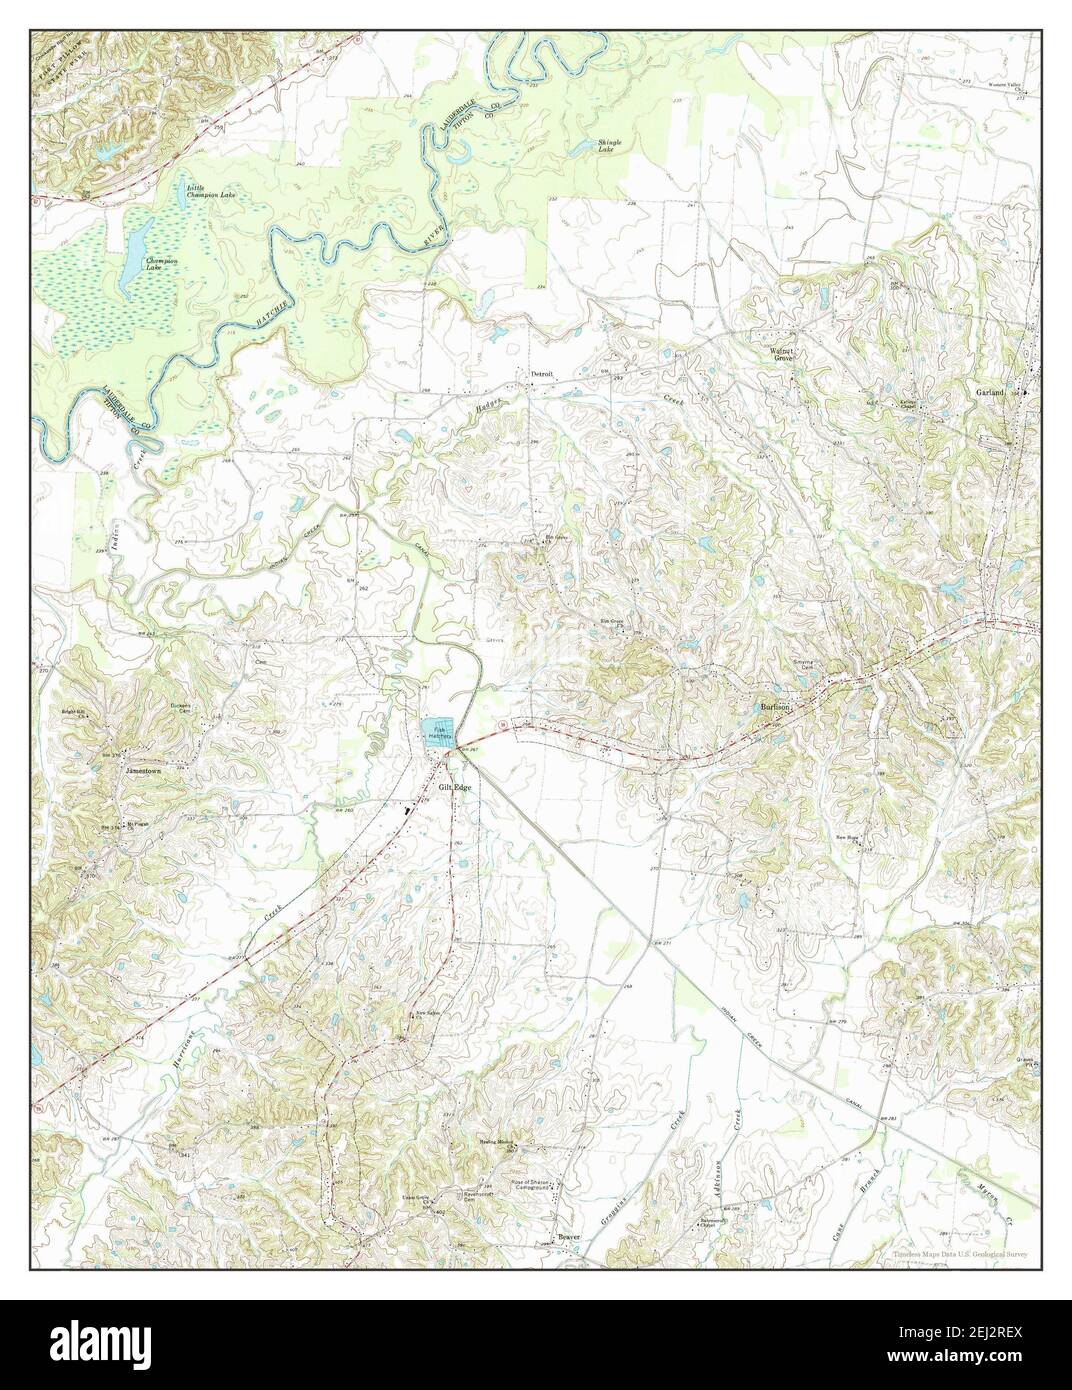 Gilt Edge, Tennessee, map 1972, 1:24000, United States of America by Timeless Maps, data U.S. Geological Survey Stock Photo